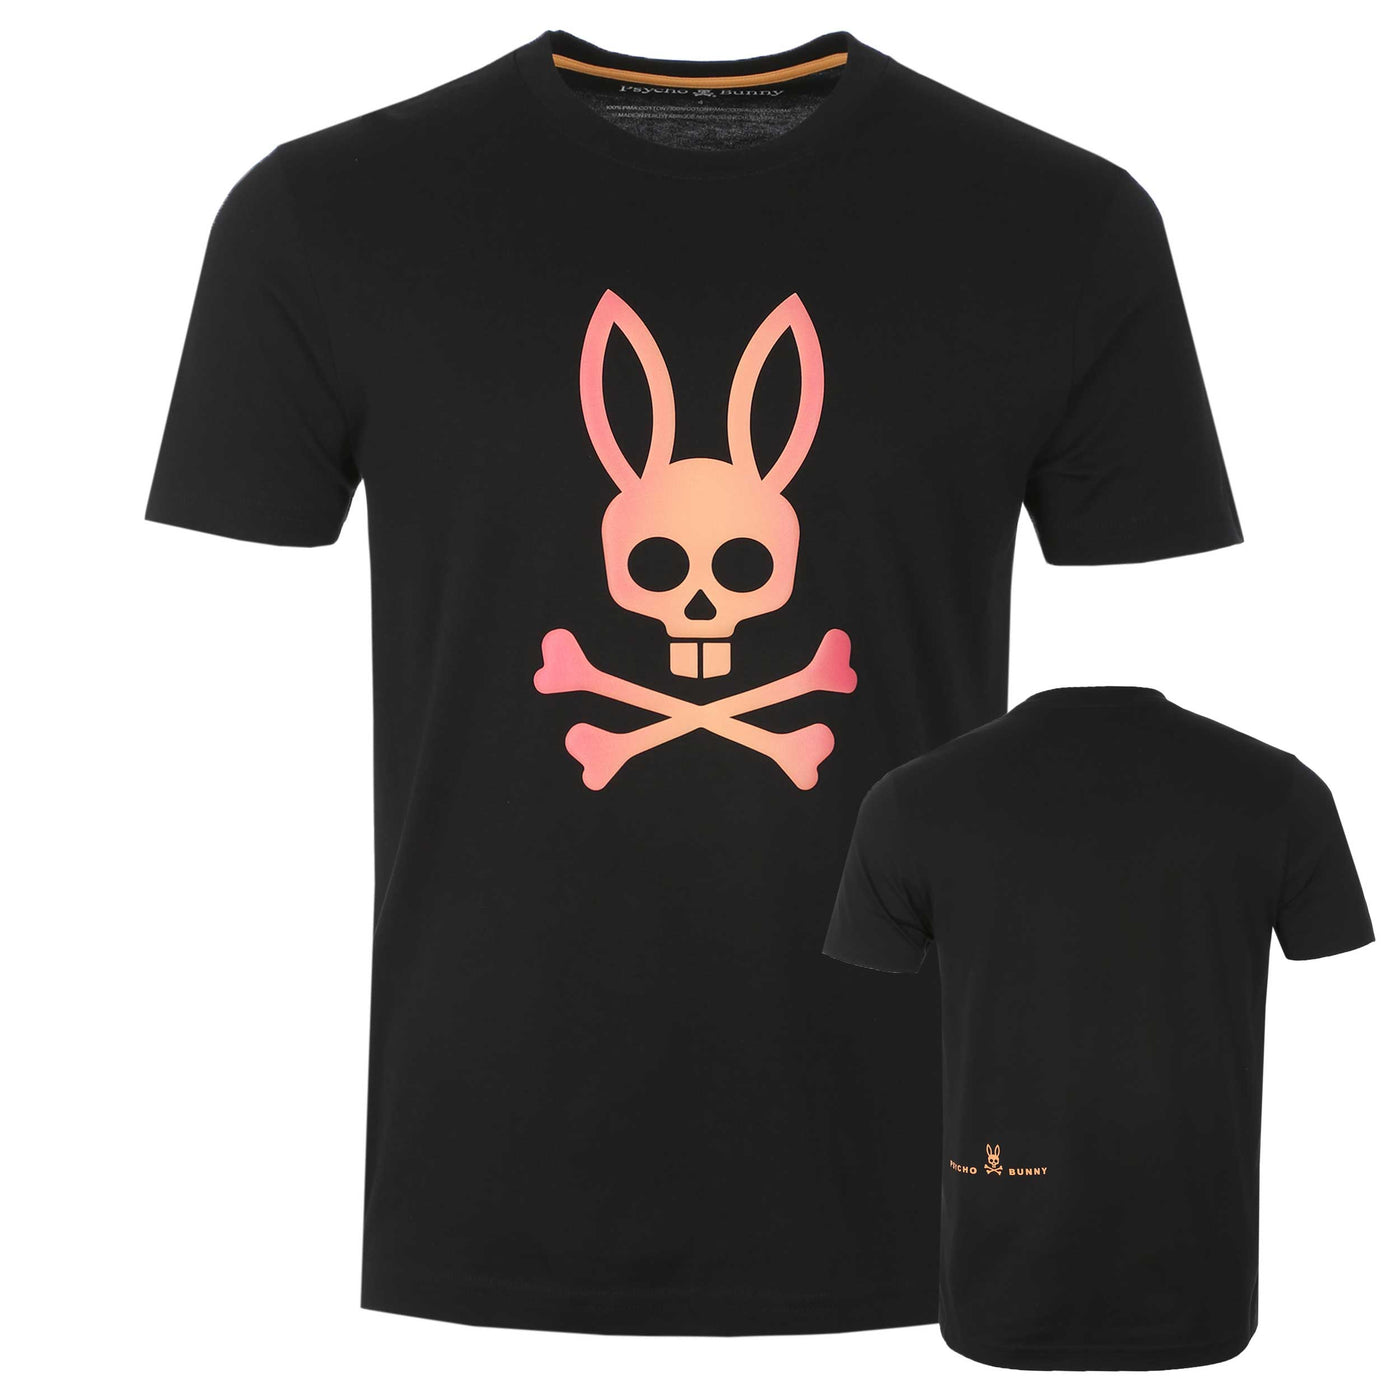 Psycho Bunny Norwood Graphic T-Shirt in Black